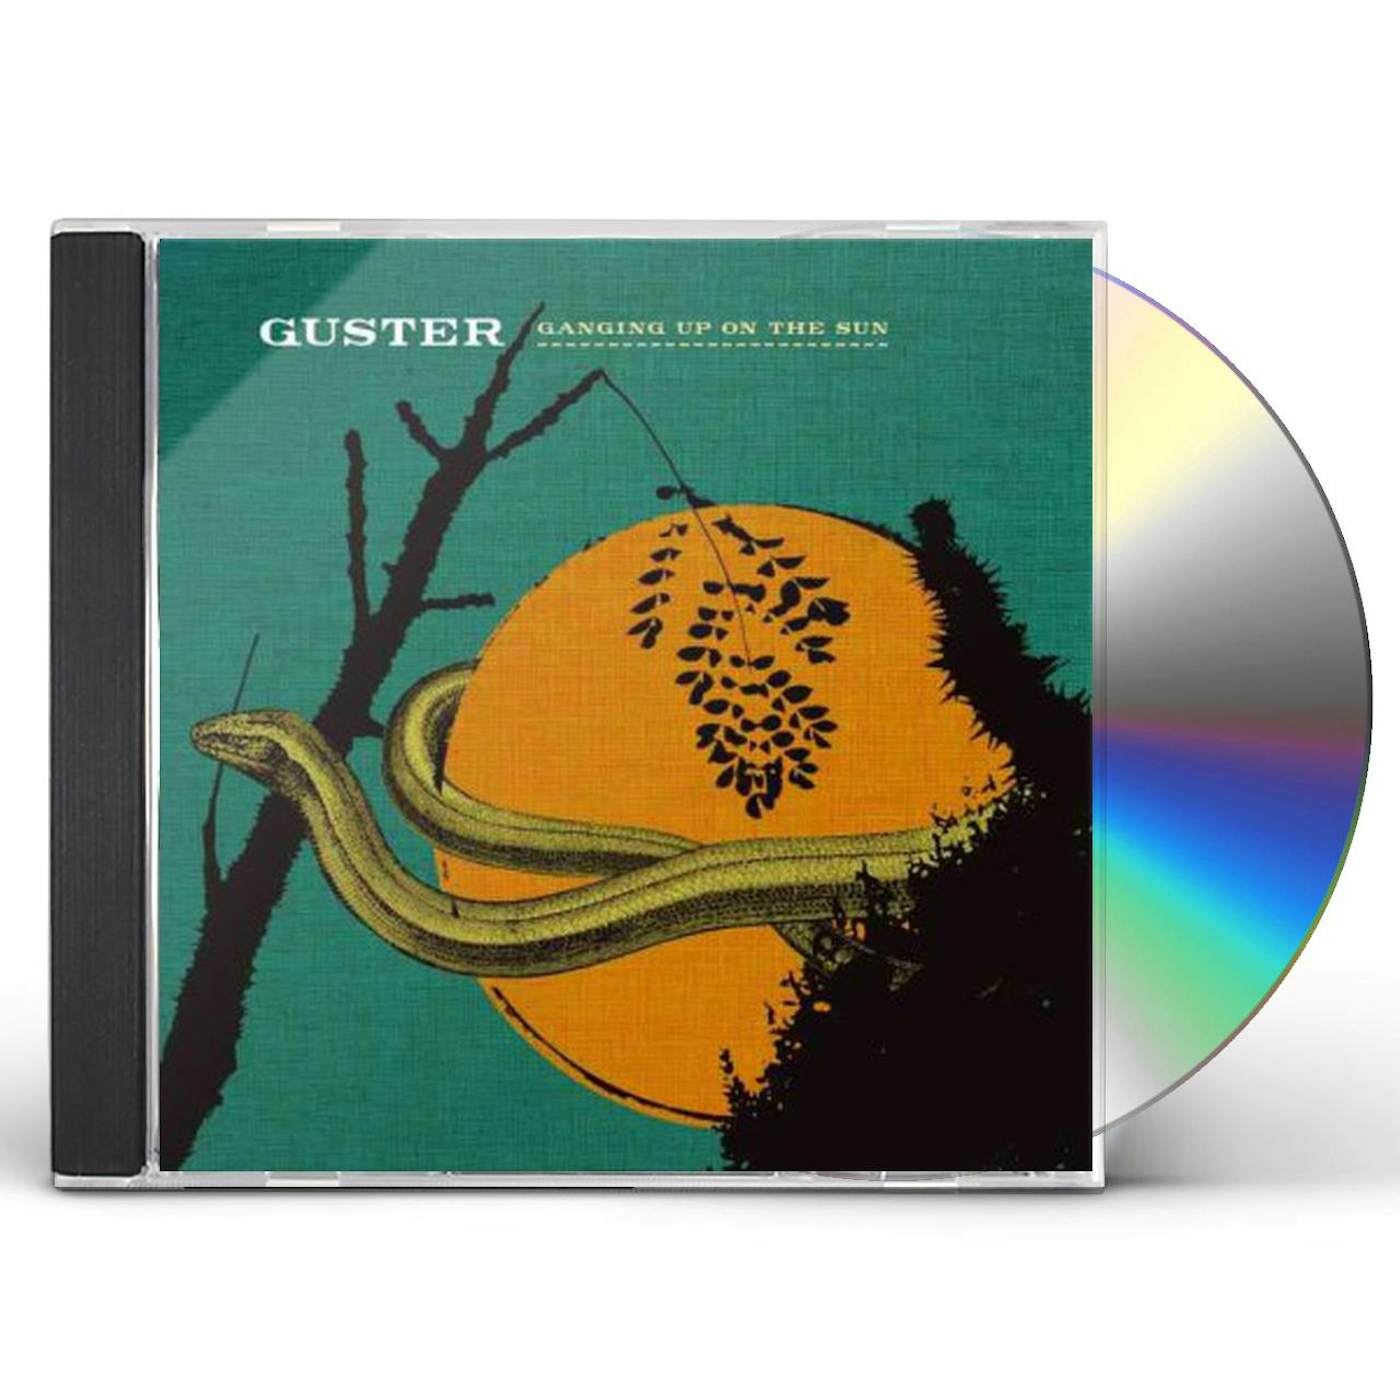 Guster GANGING UP ON THE SUN CD